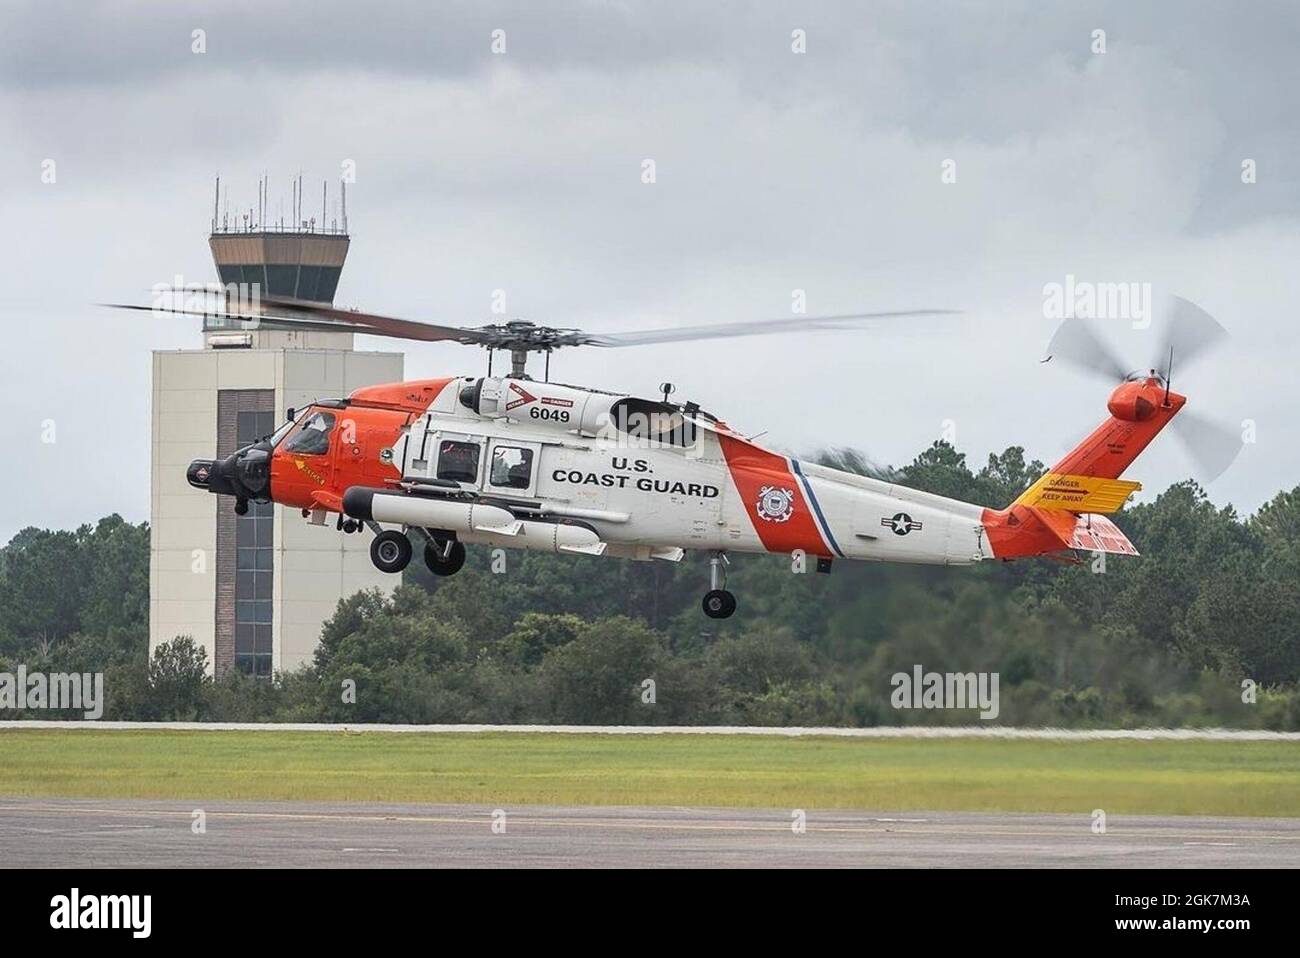 An MH-60 Jayhawk helicopter crew conduct a training flight at Aviation Training Center Mobile in Alabama on Aug. 27, 2021, ahead of Hurricane Ida. Coast Guard crew prepare and relocate aircraft out of the main path of the storm to be ready to respond as soon as the worst passes. Stock Photo